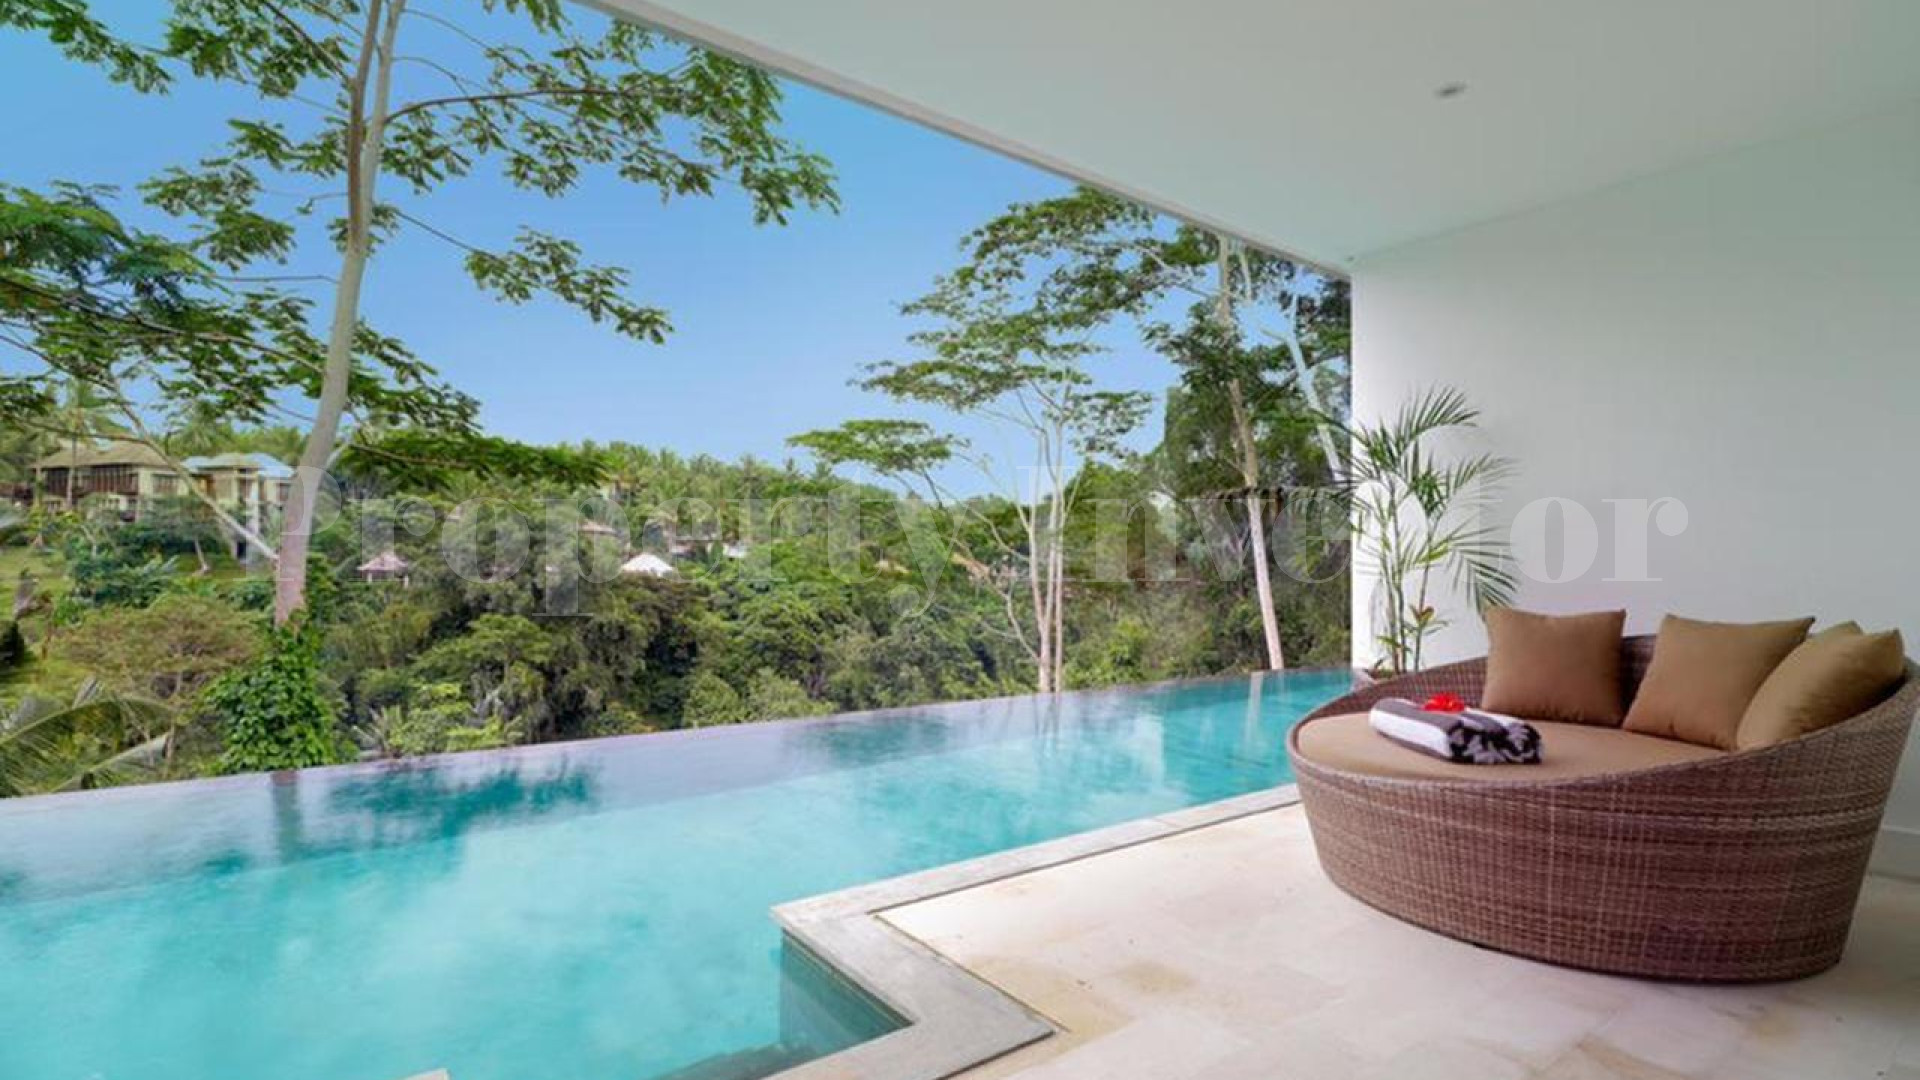 18 Bedroom 4* Star Boutique Hotel & Retreat with Unbelievable Jungle View Infinity Pool for Sale in East Ubud, Bali